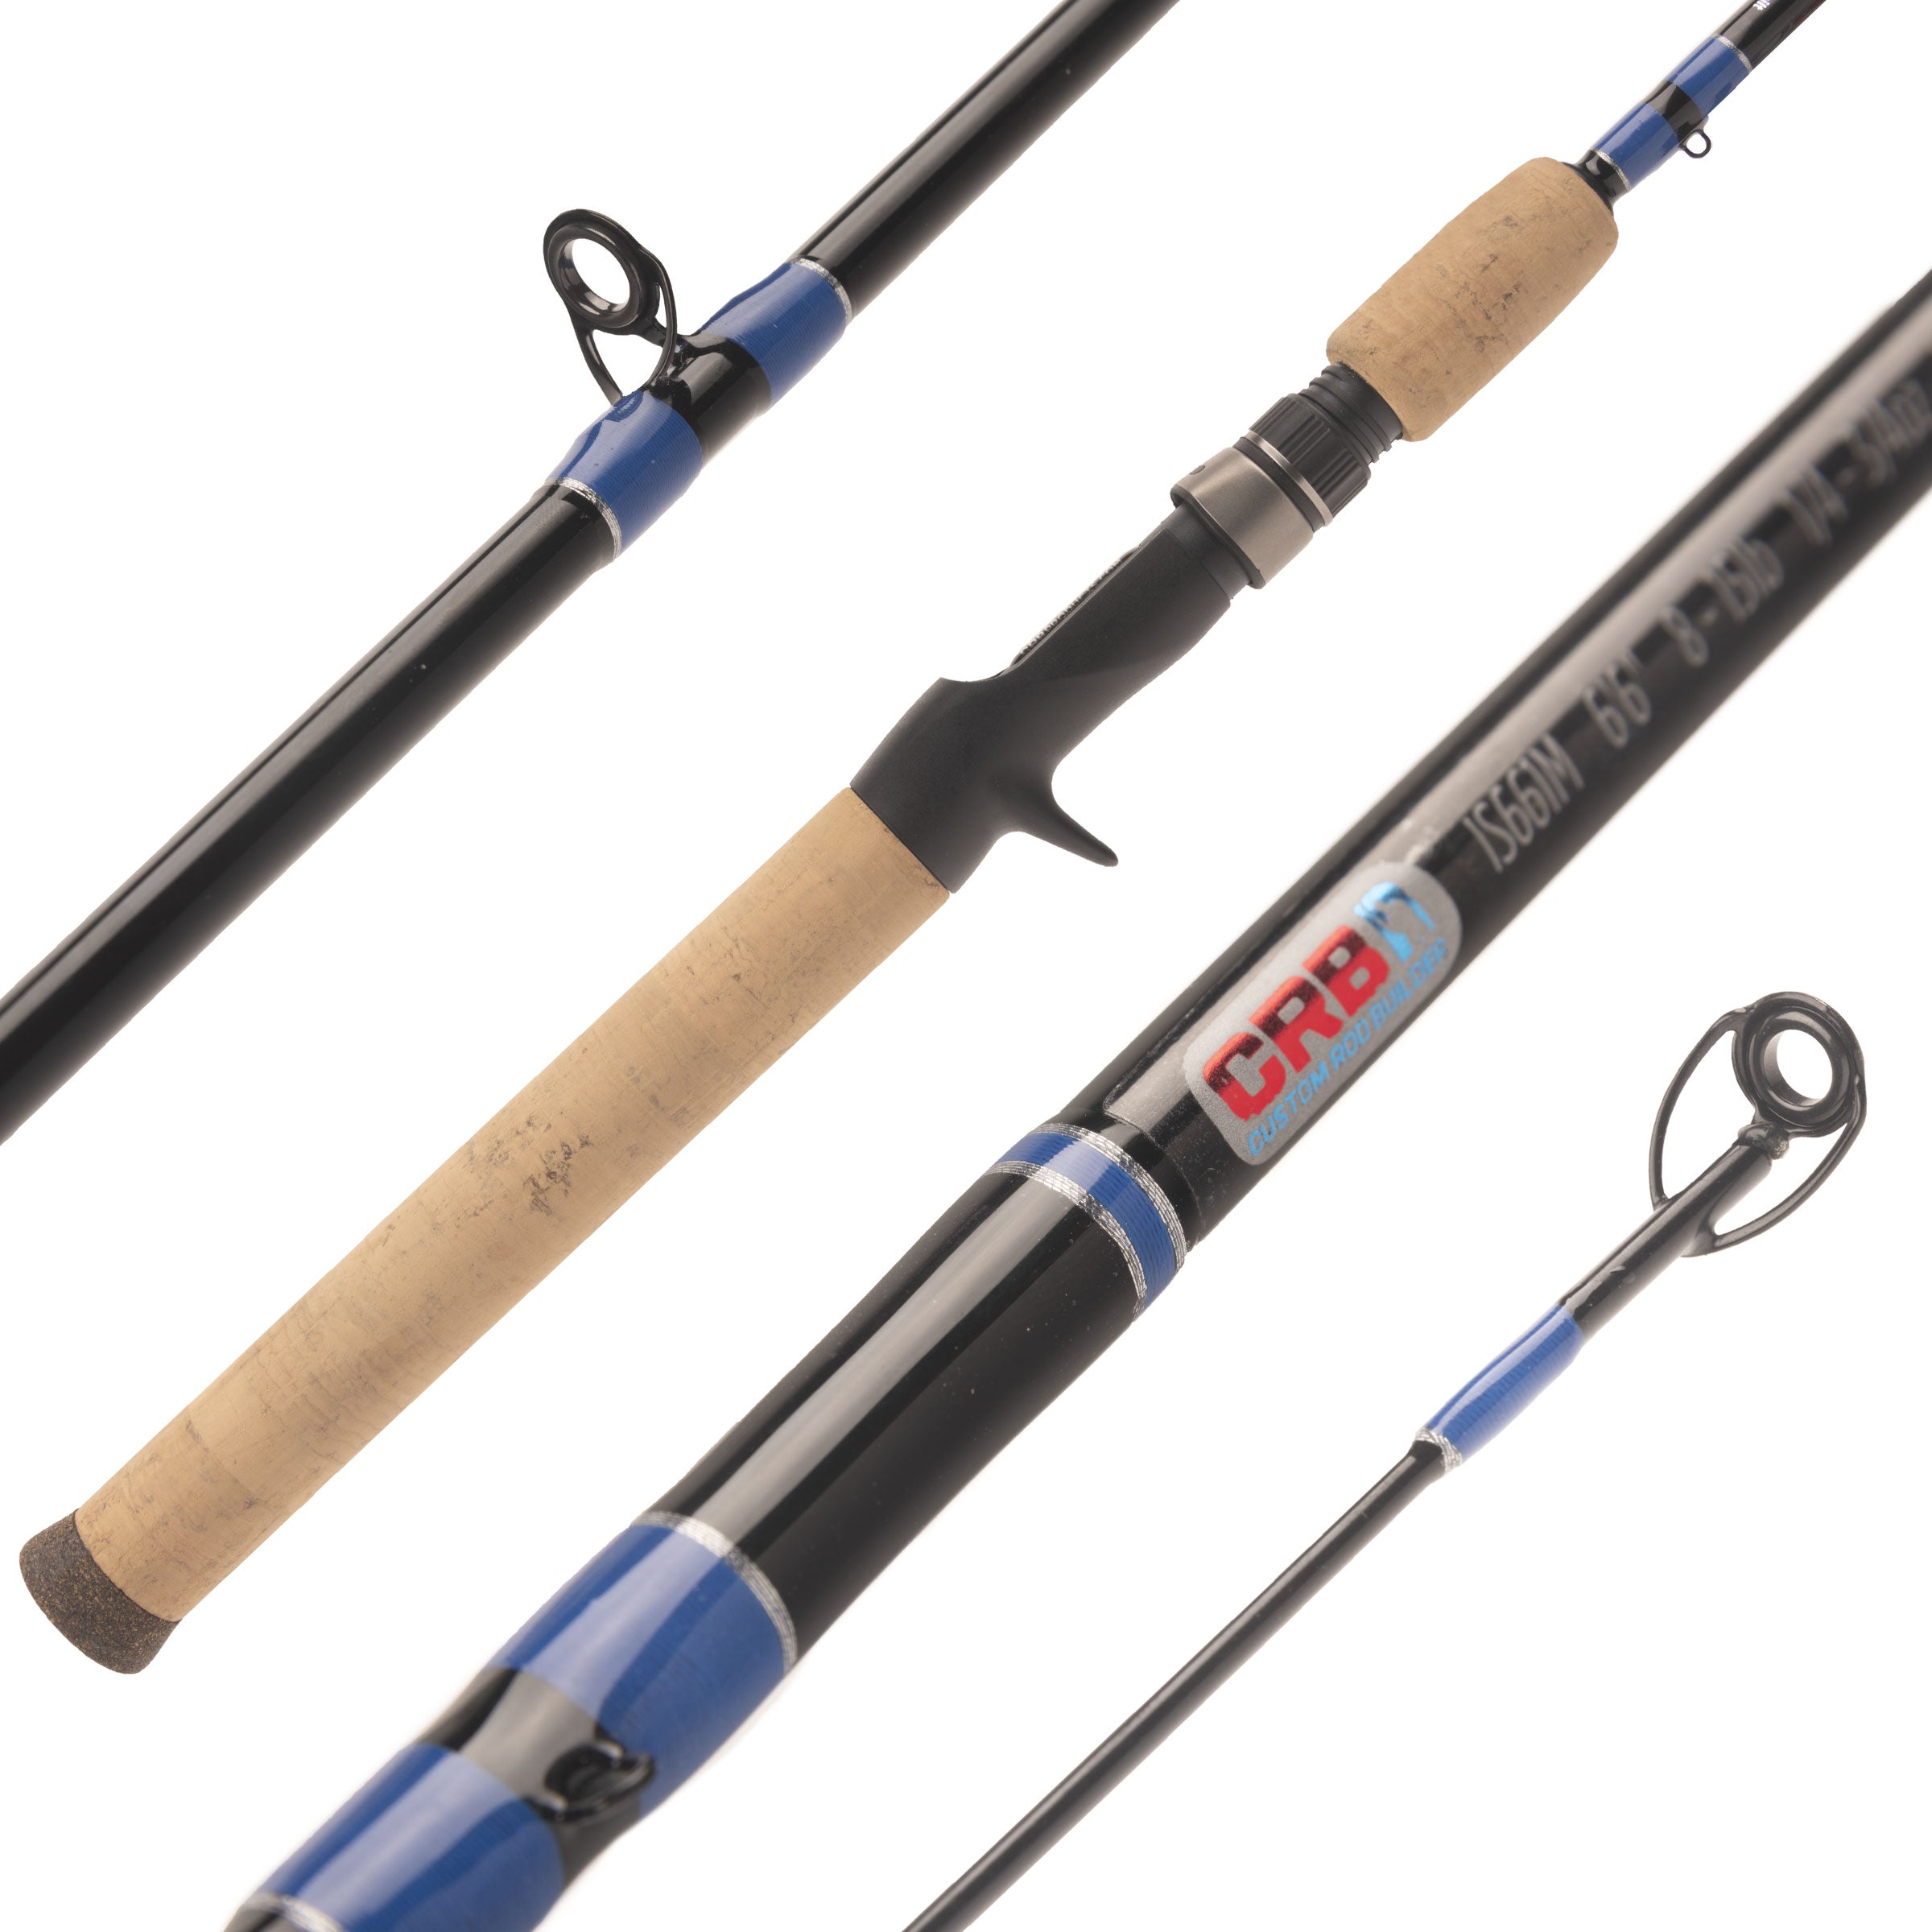 Fishing rod building tools and supplies - sporting goods - by